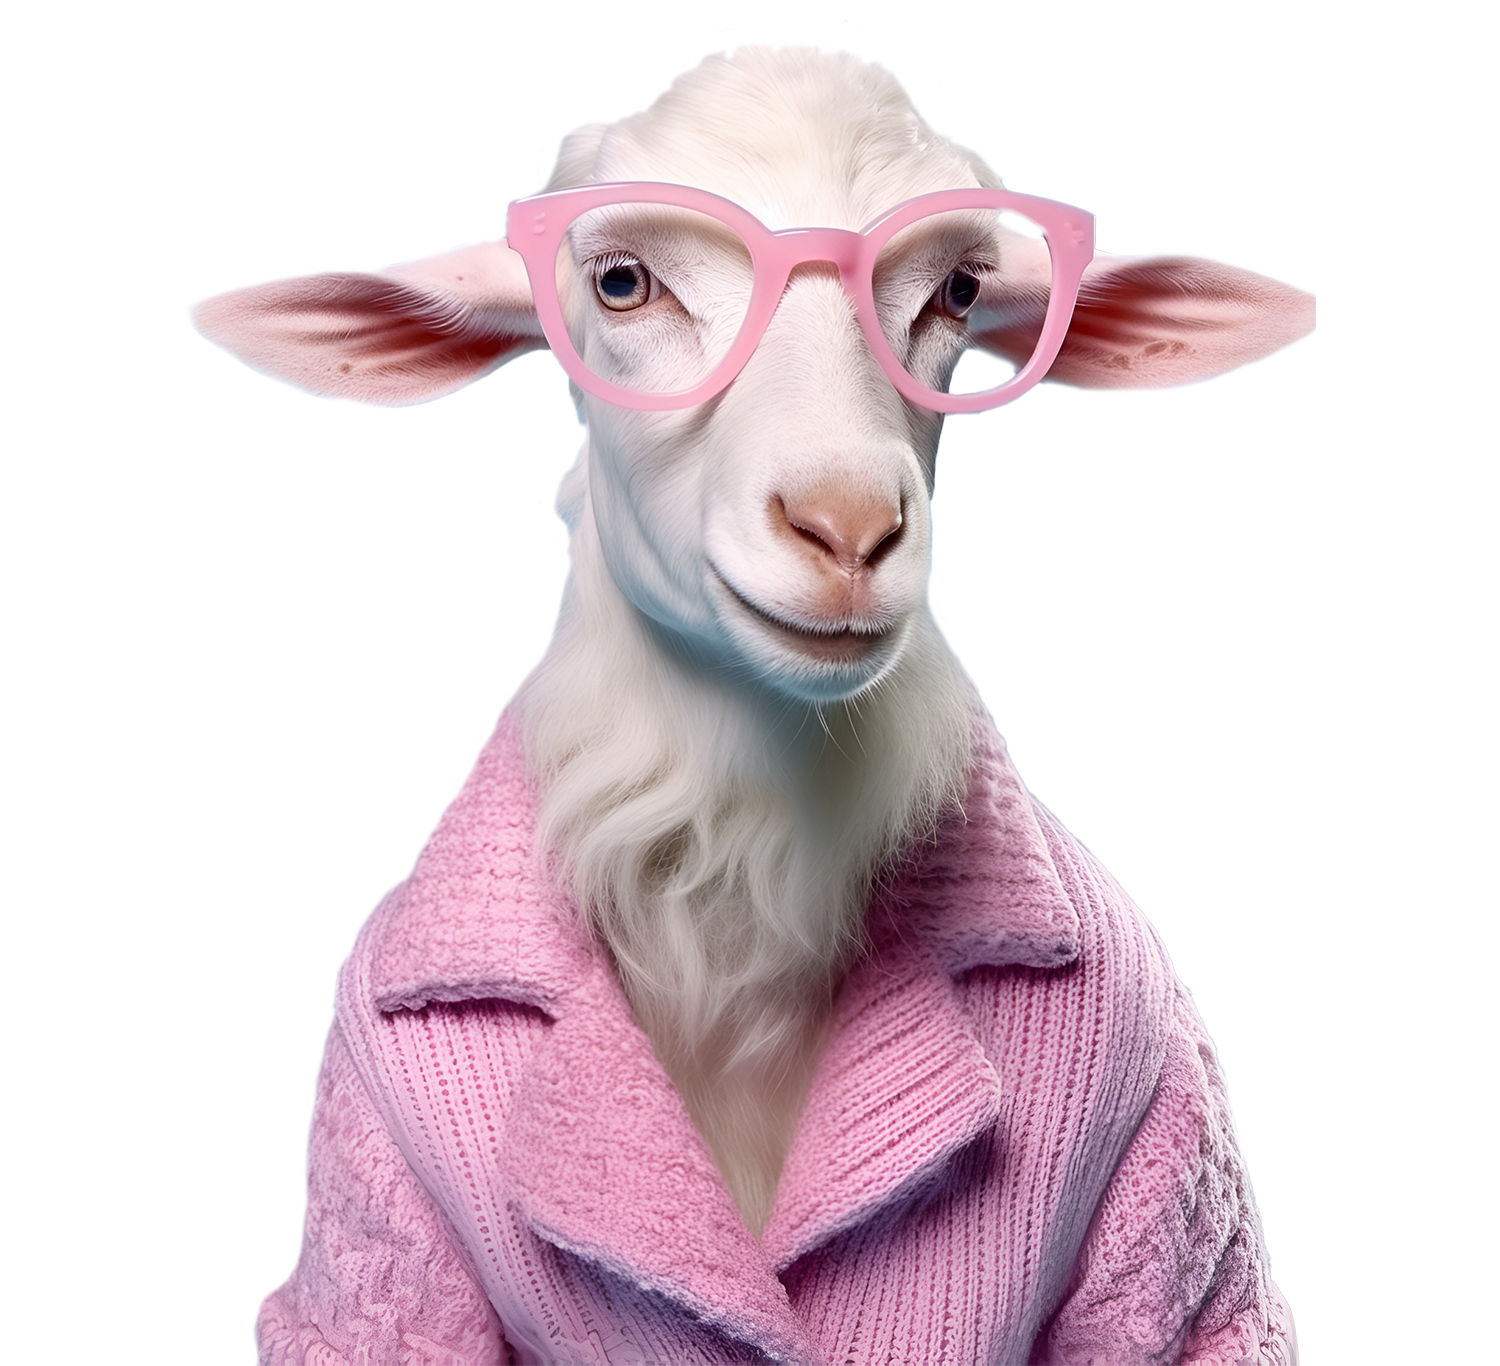 Goat with pink jacket and glasses